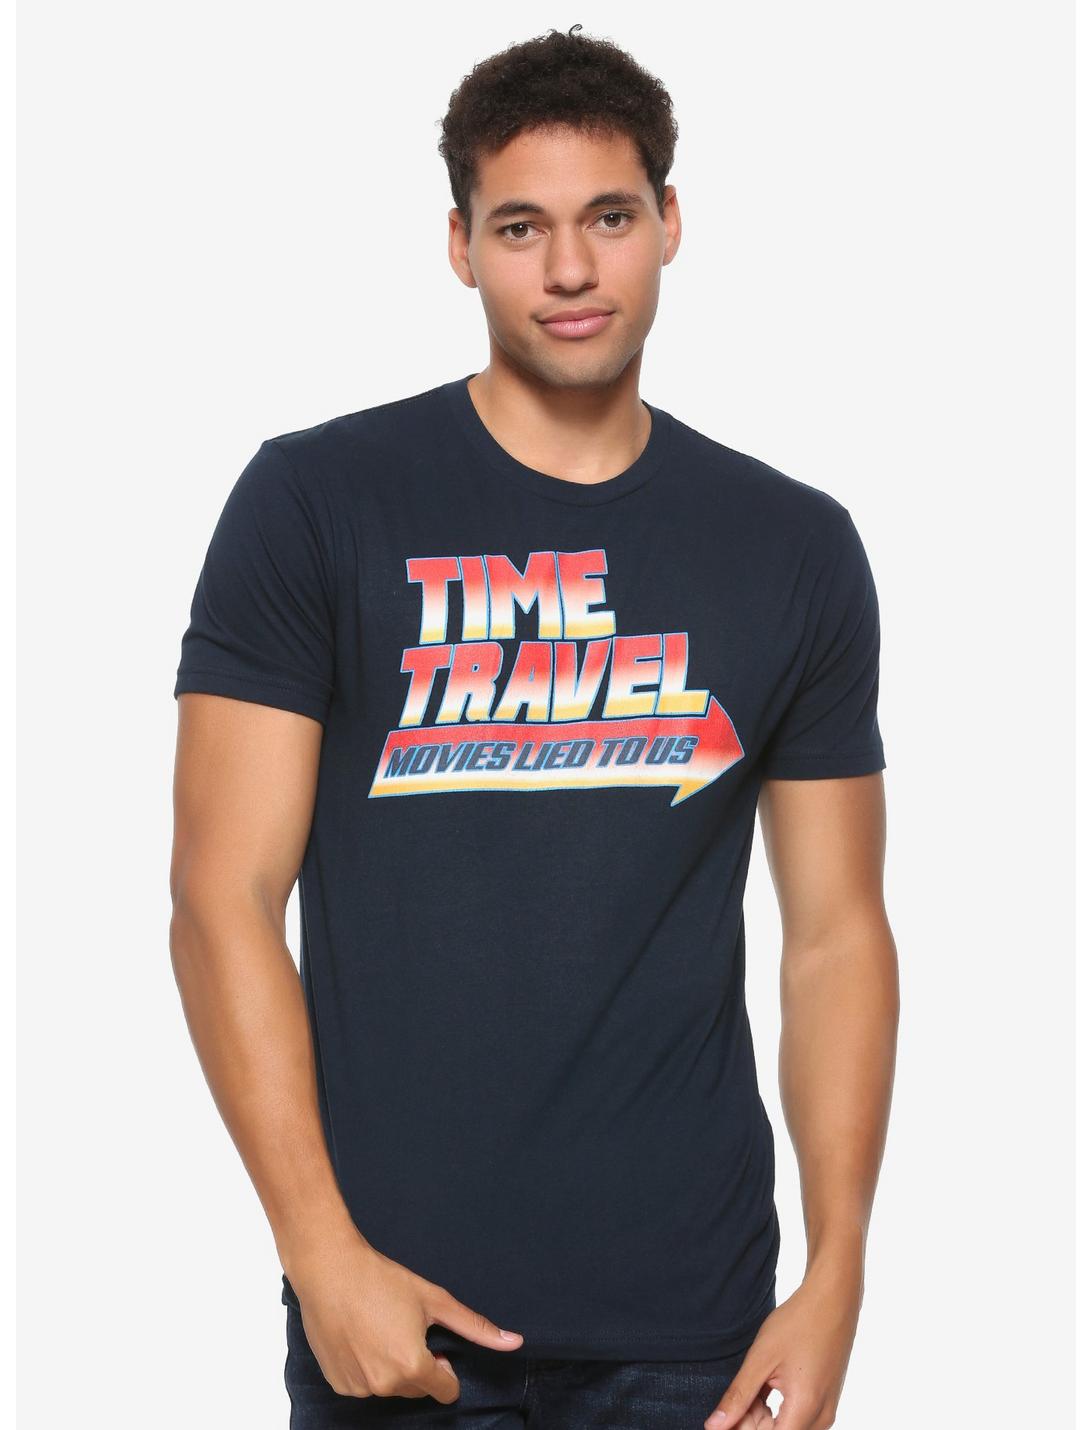 Time Travel Movies Lied to Us T-Shirt - BoxLunch Exclusive, BLUE, hi-res